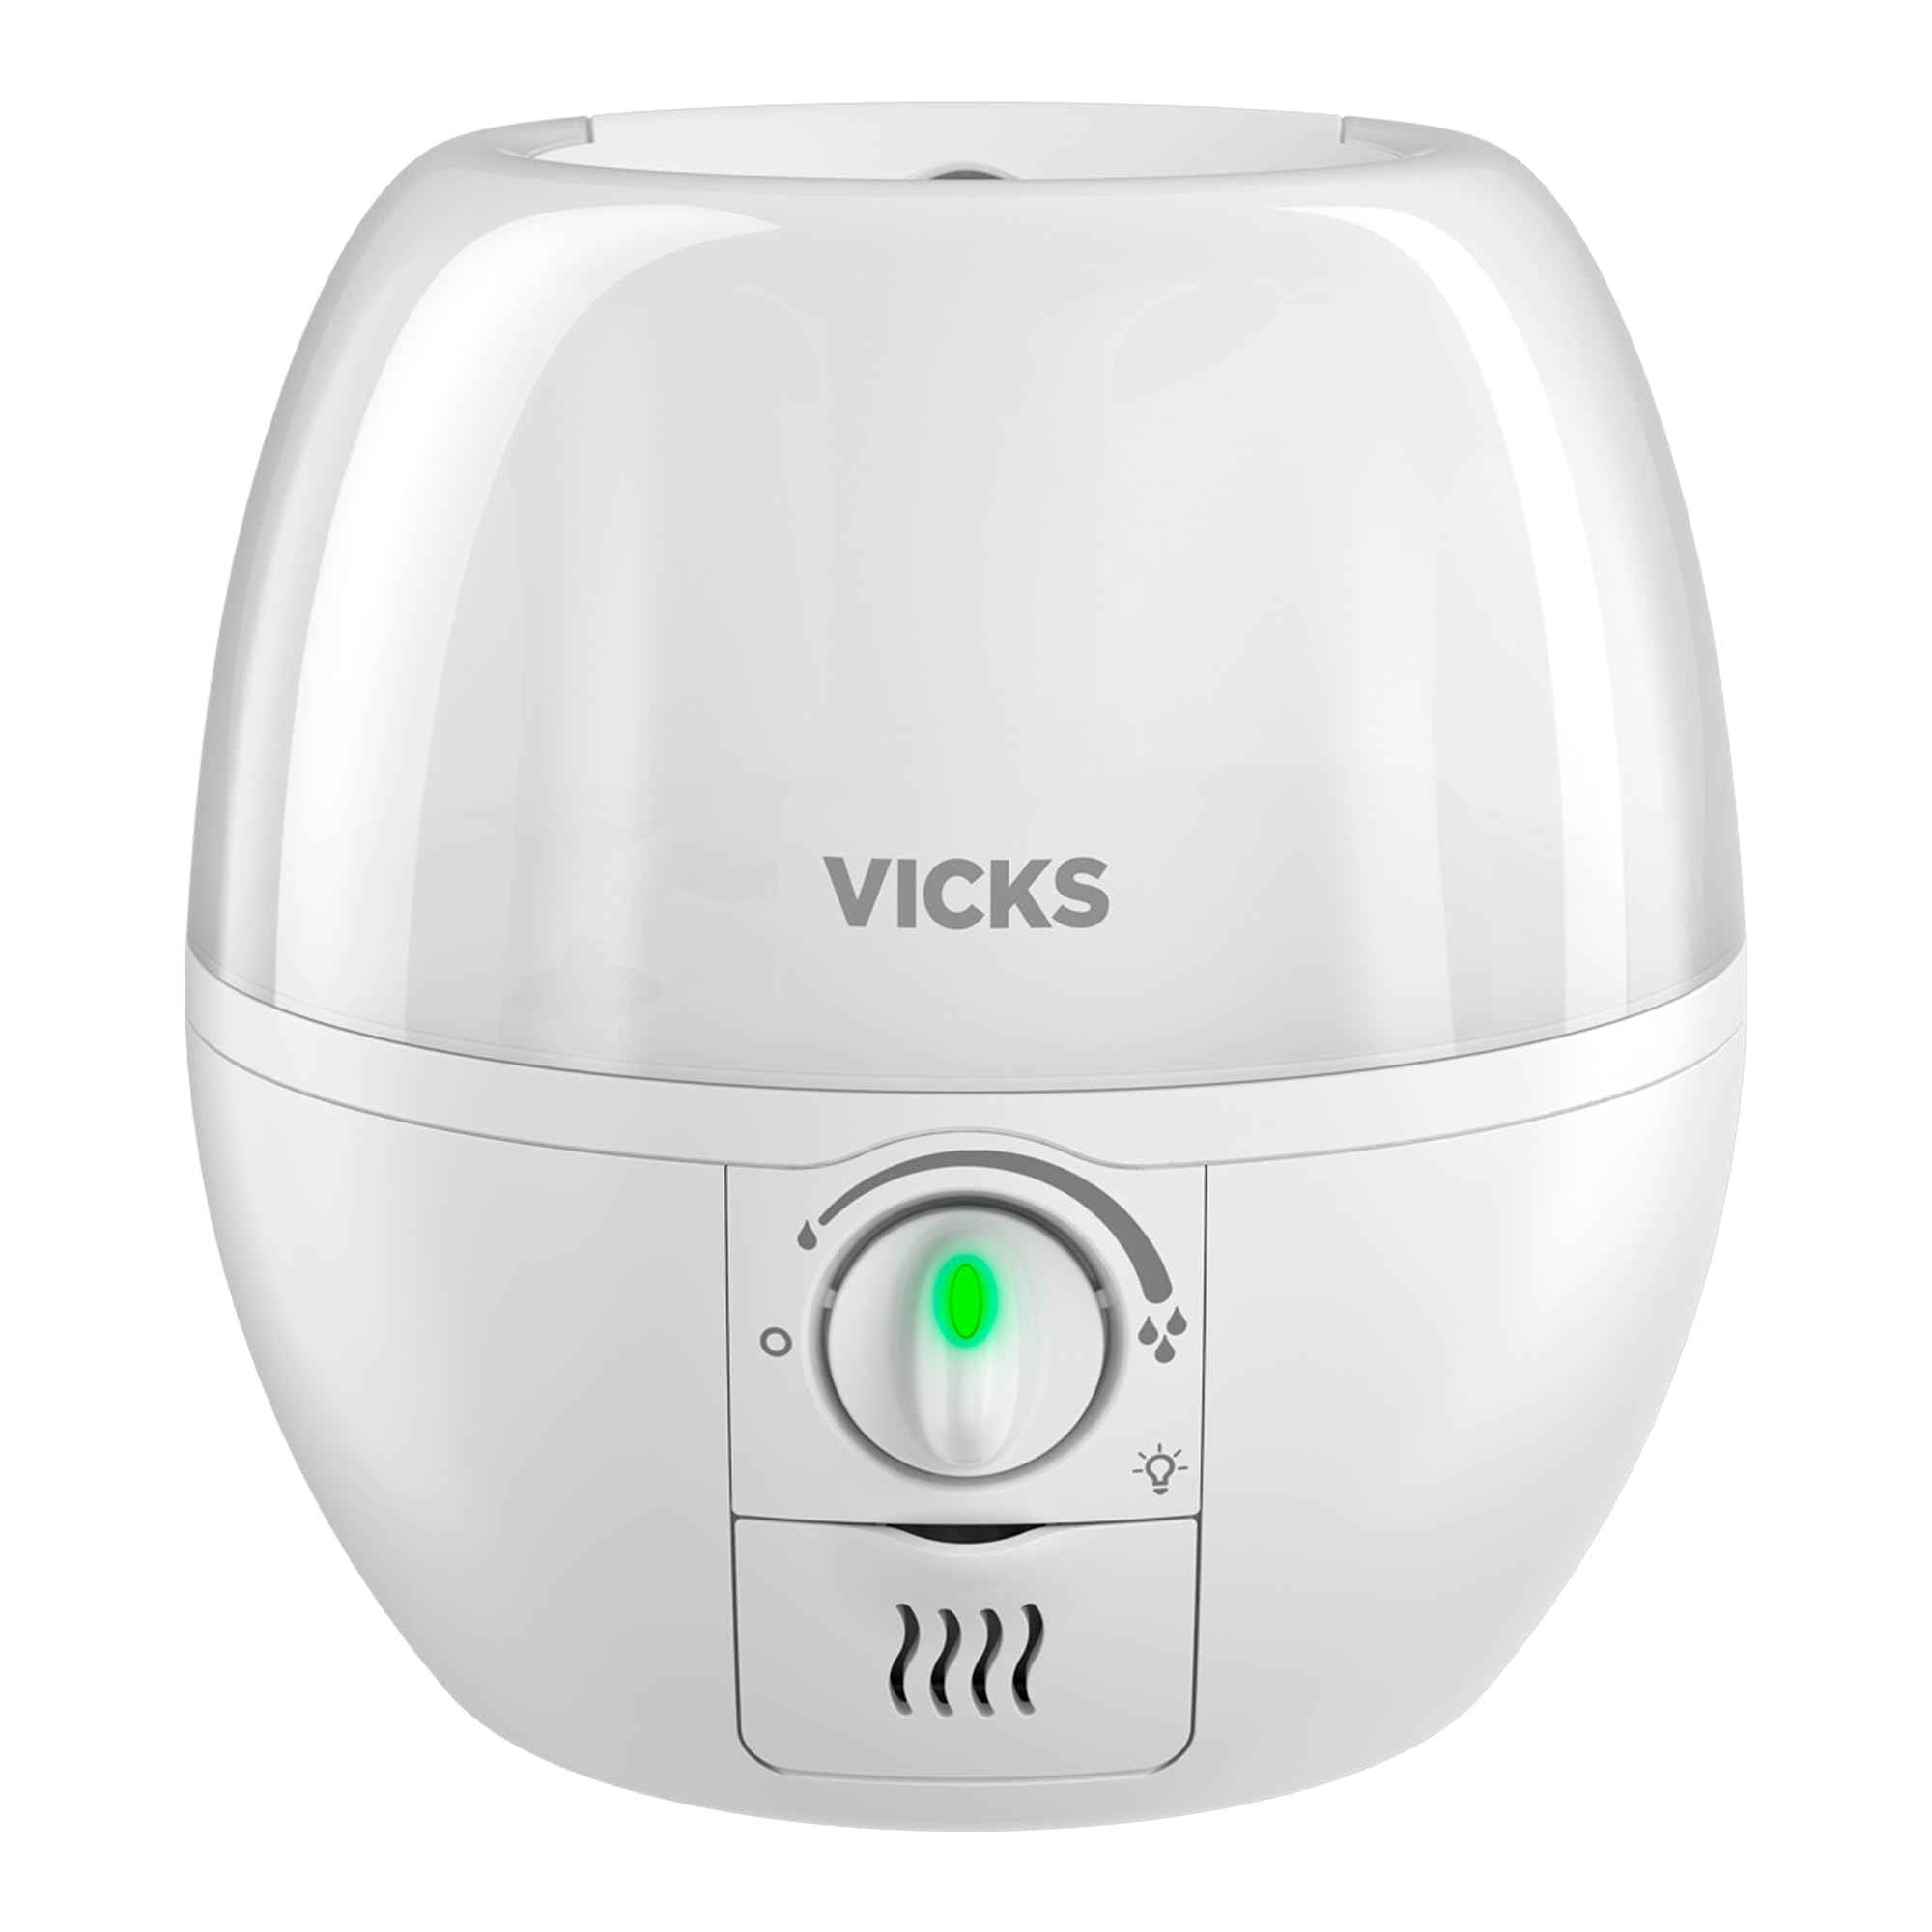 Vicks 3-in-1 Sleepy Time Ultrasonic Humidifier & Essential Oil Diffuser $20 + Free Shipping w/ Prime or on $35+